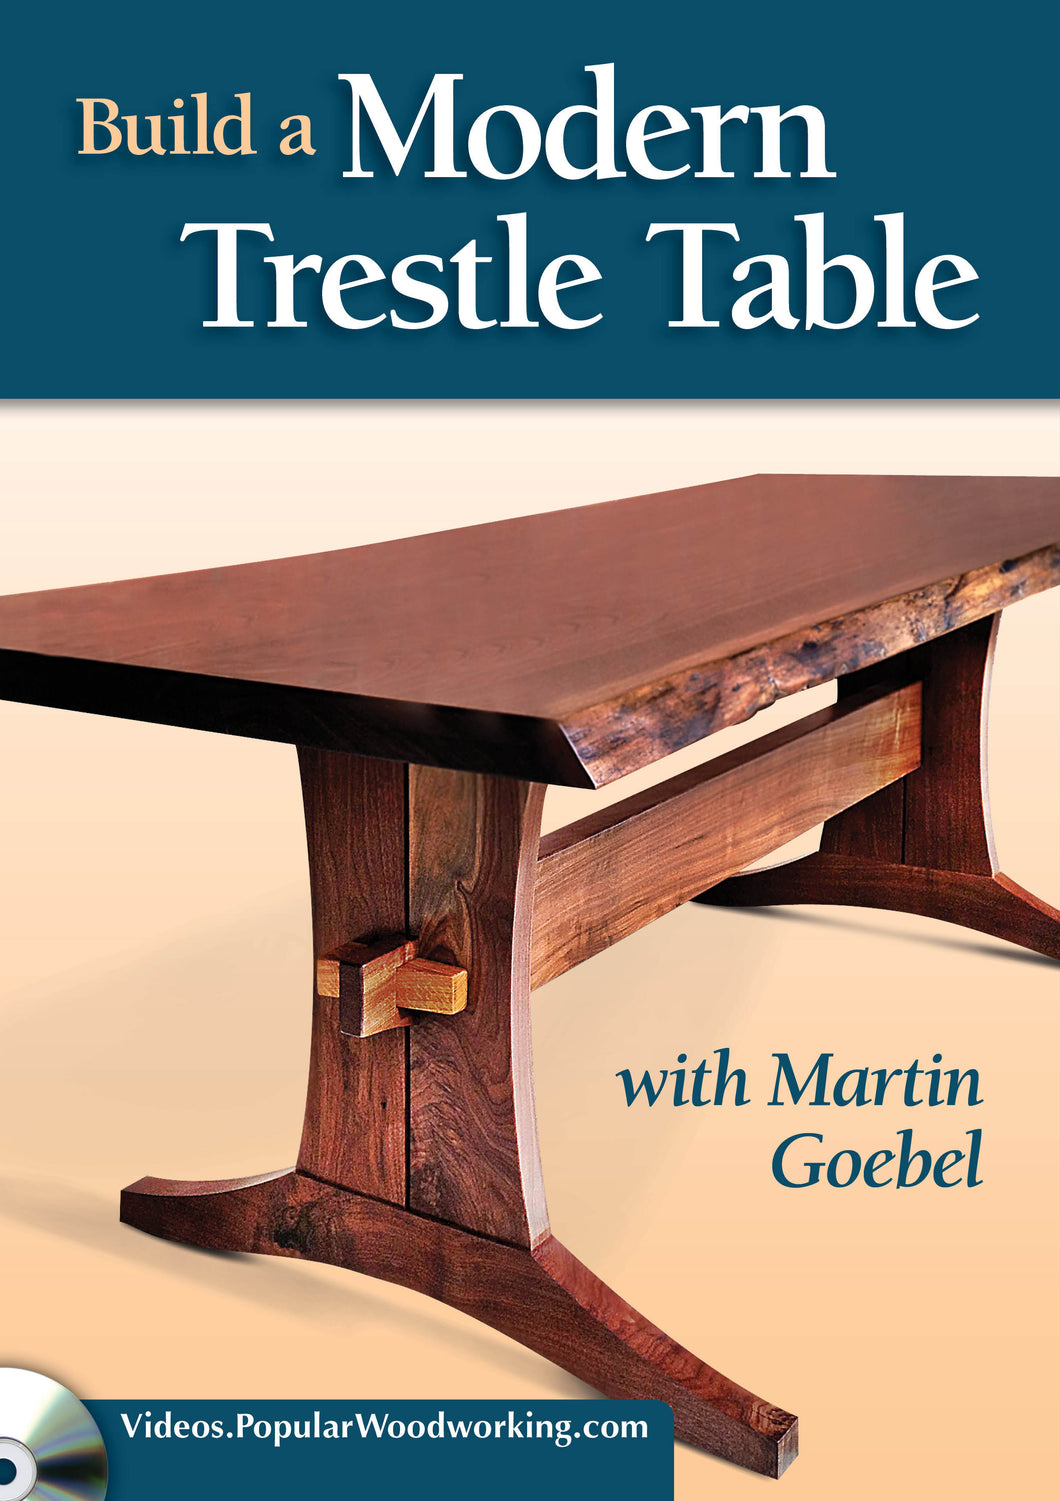 Build a Modern Trestle Table Video Download